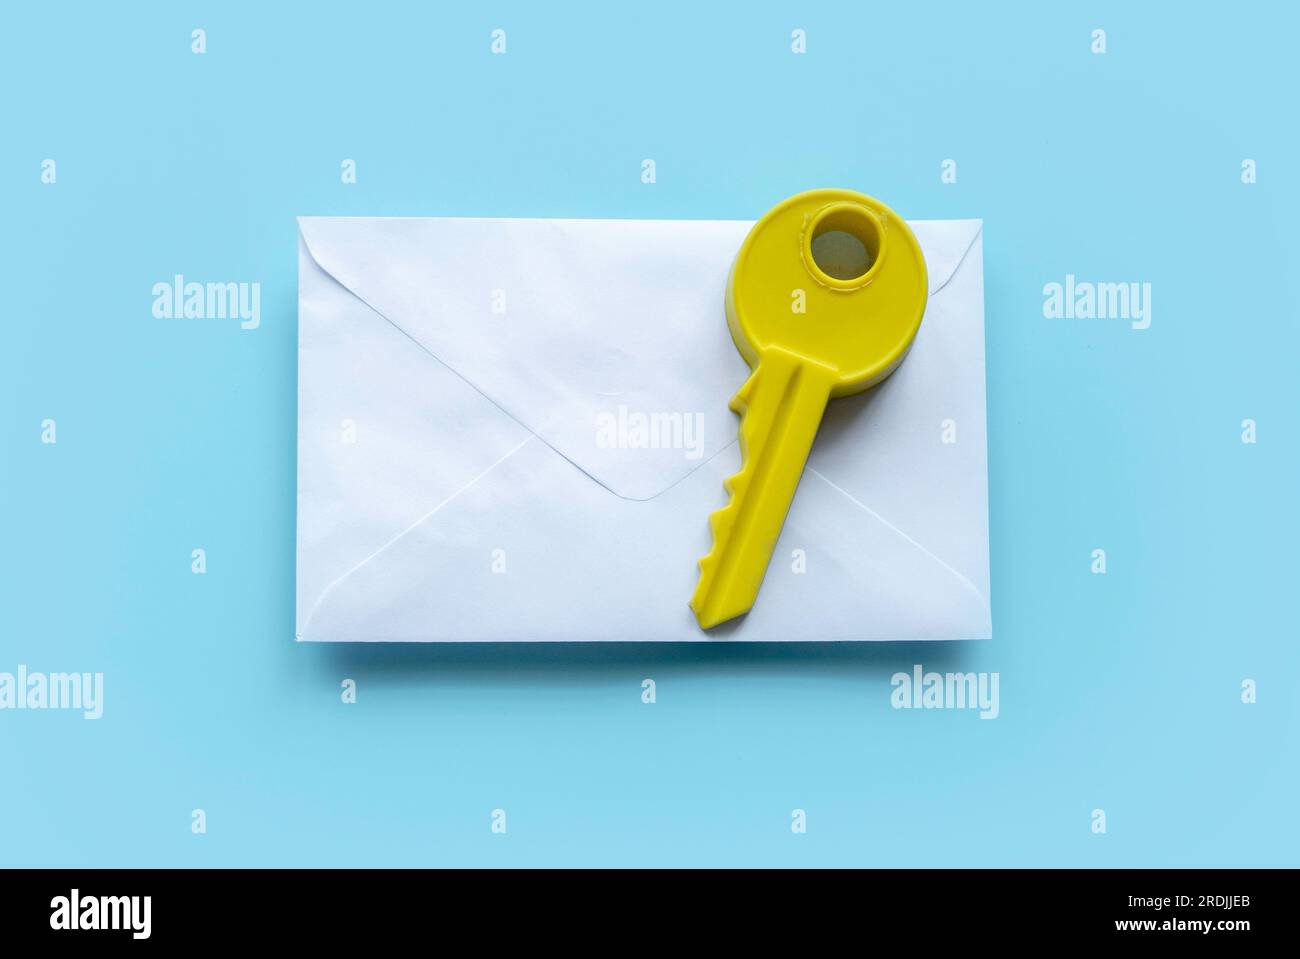 Concept of email security, secure communication, secret and confidential. Key above white envolope over a blue background. Stock Photo